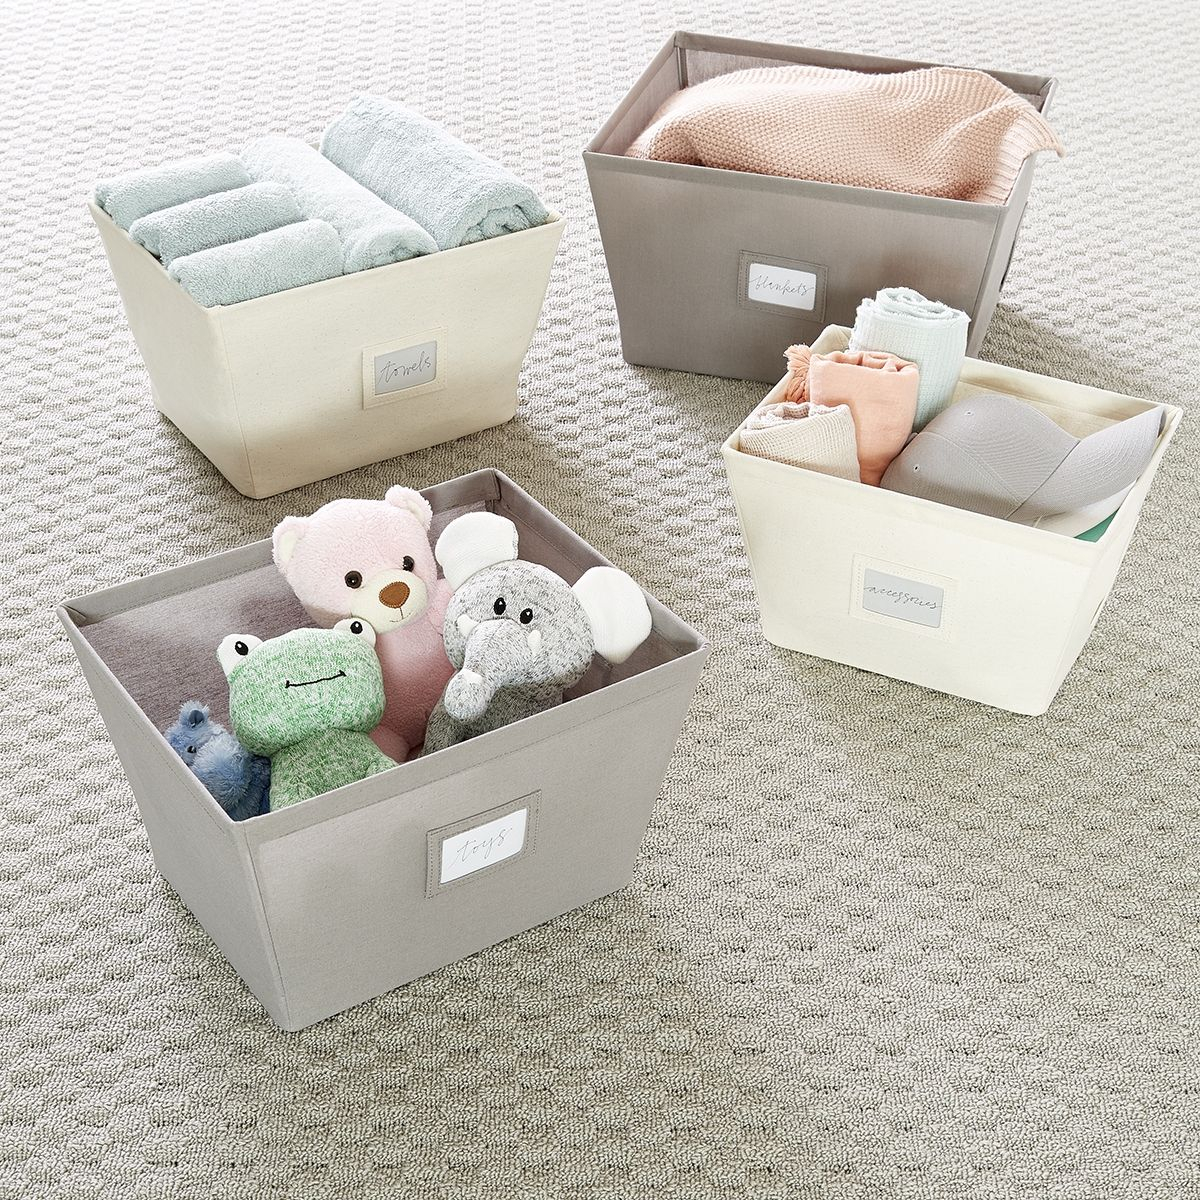 Open Canvas Storage Bins With Labels Customer Favorites Fabric intended for dimensions 1200 X 1200